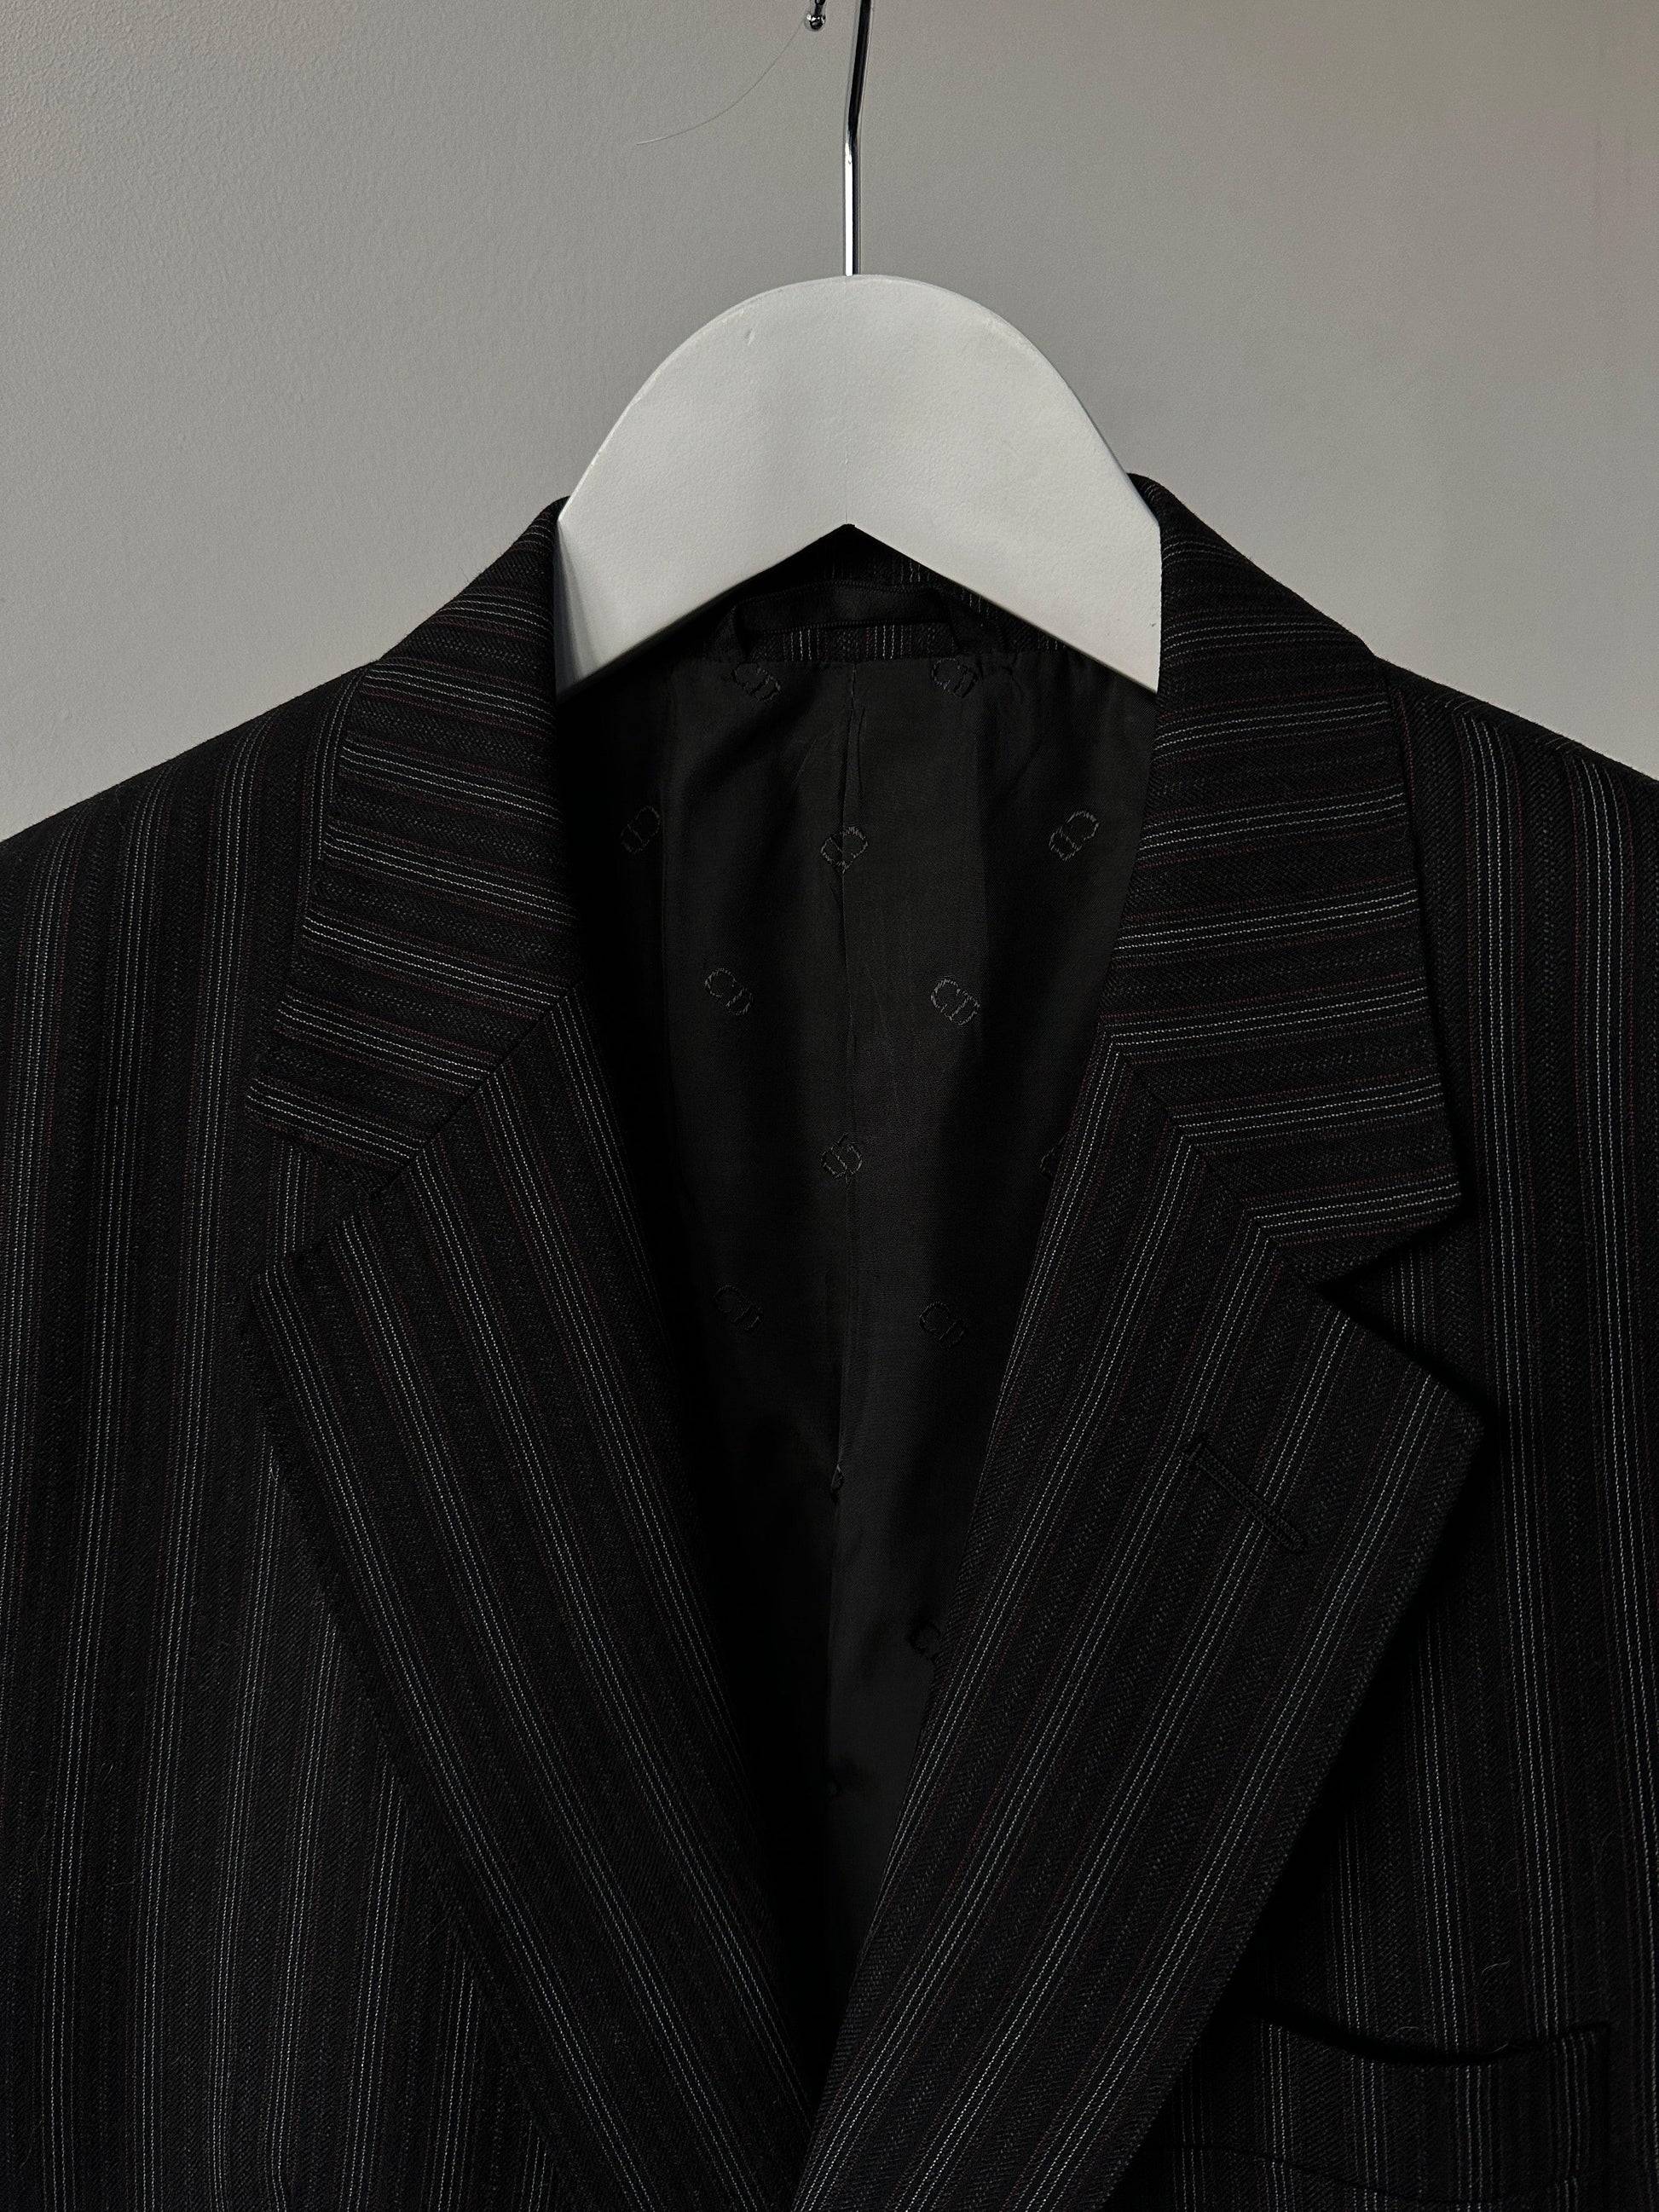 Christian Dior Pure Wool Pinstripe Suit - 42L/W34 - Known Source